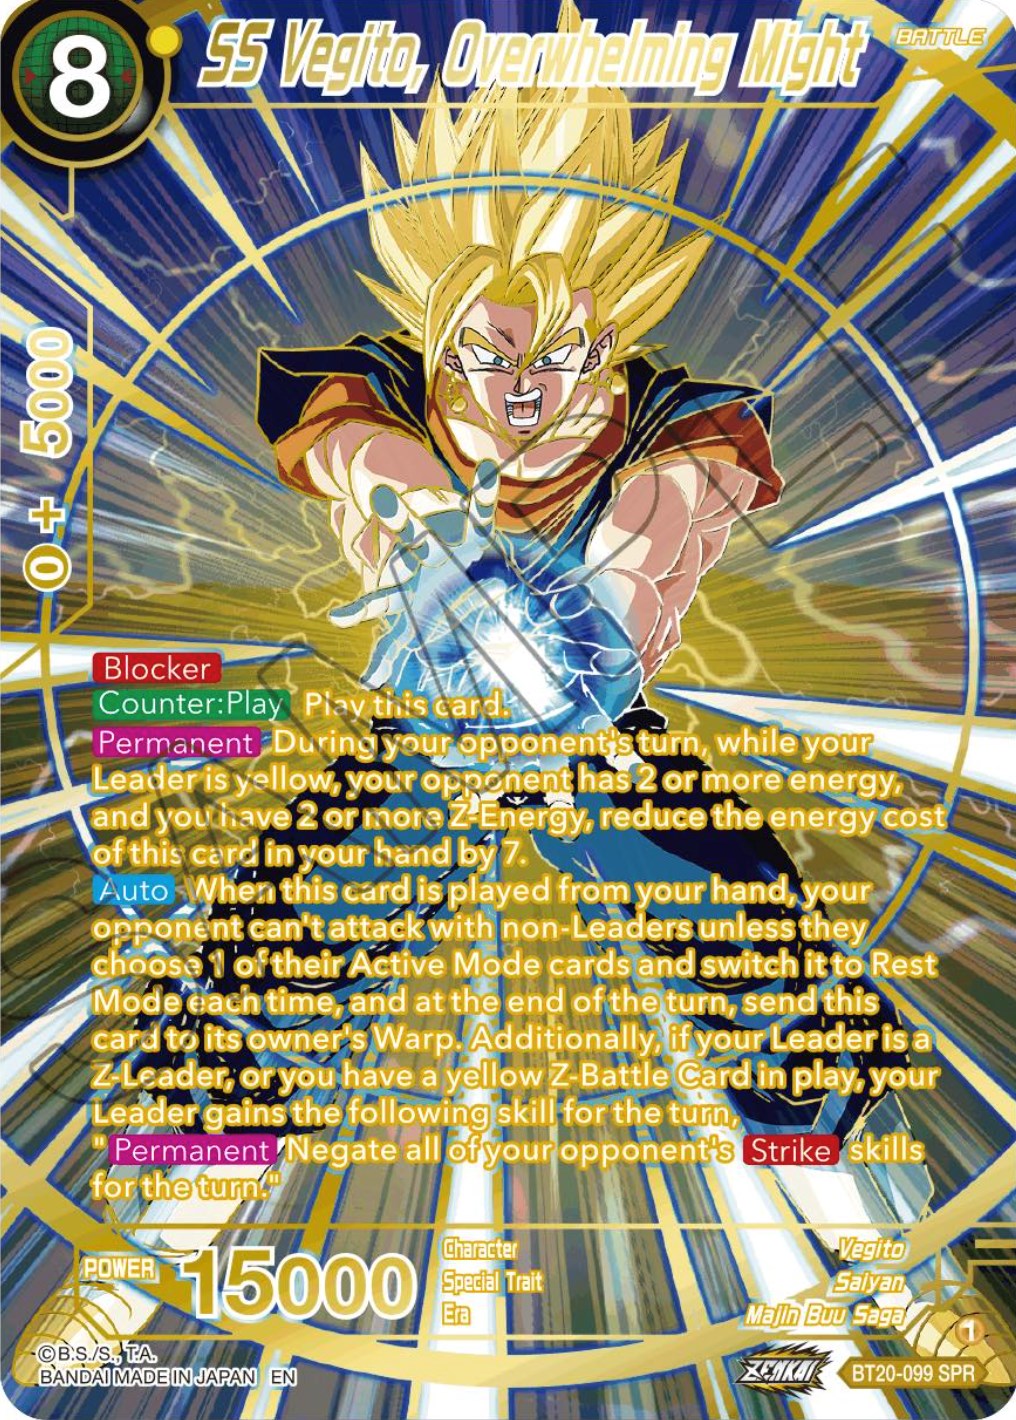 SS Vegito, Overwhelming Might (SPR) (BT20-099) [Power Absorbed] | North Valley Games